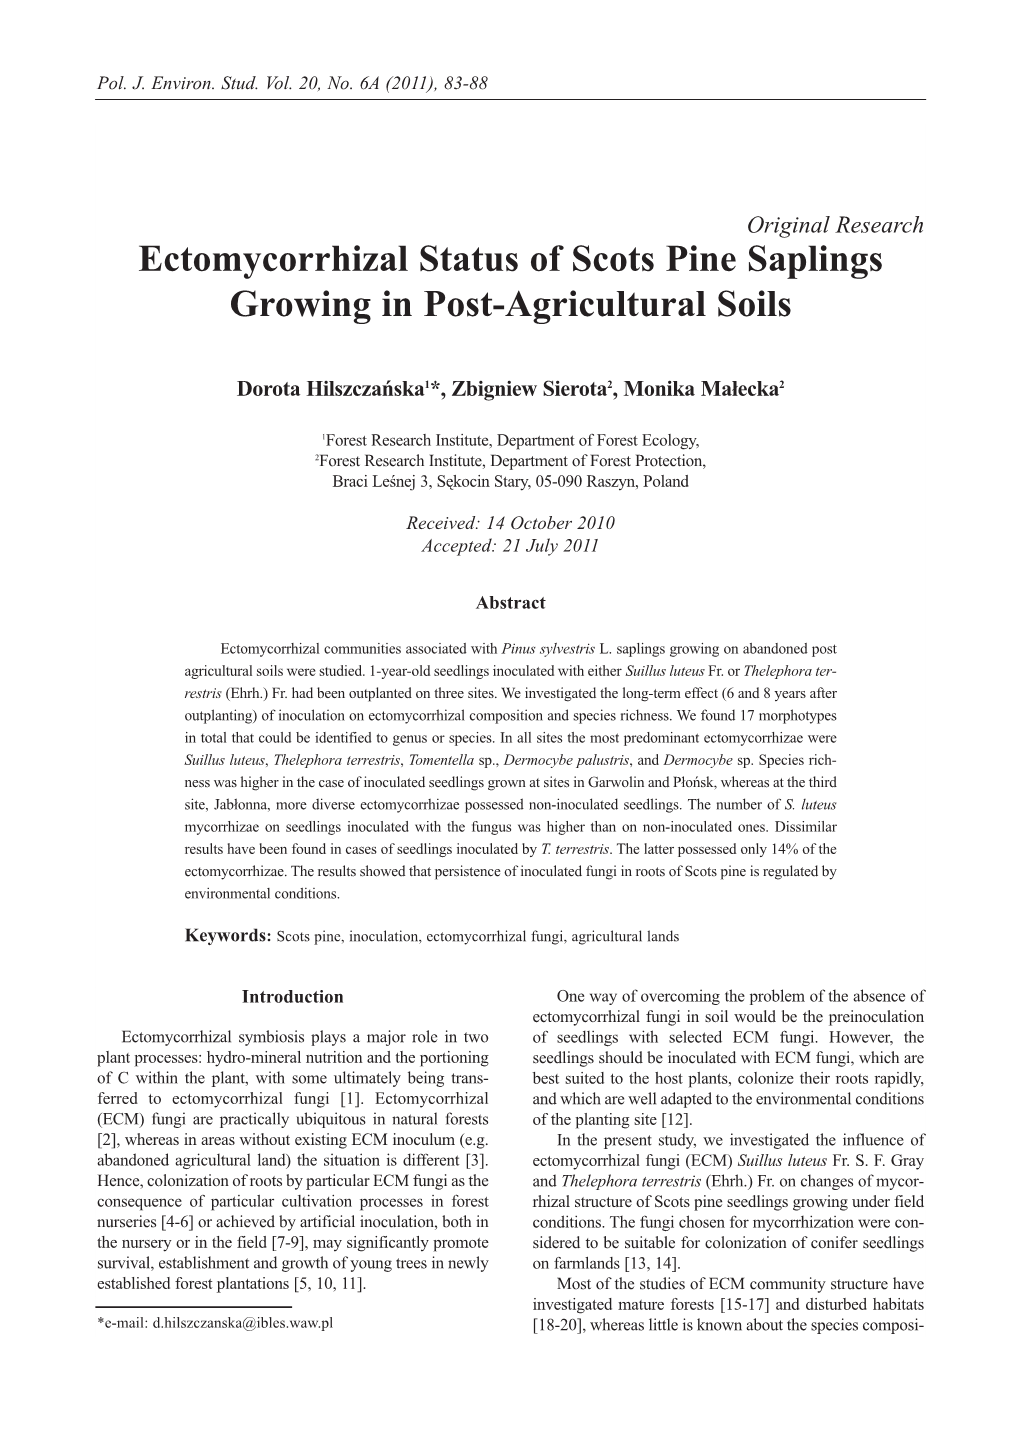 Ectomycorrhizal Status of Scots Pine Saplings Growing in Post-Agricultural Soils